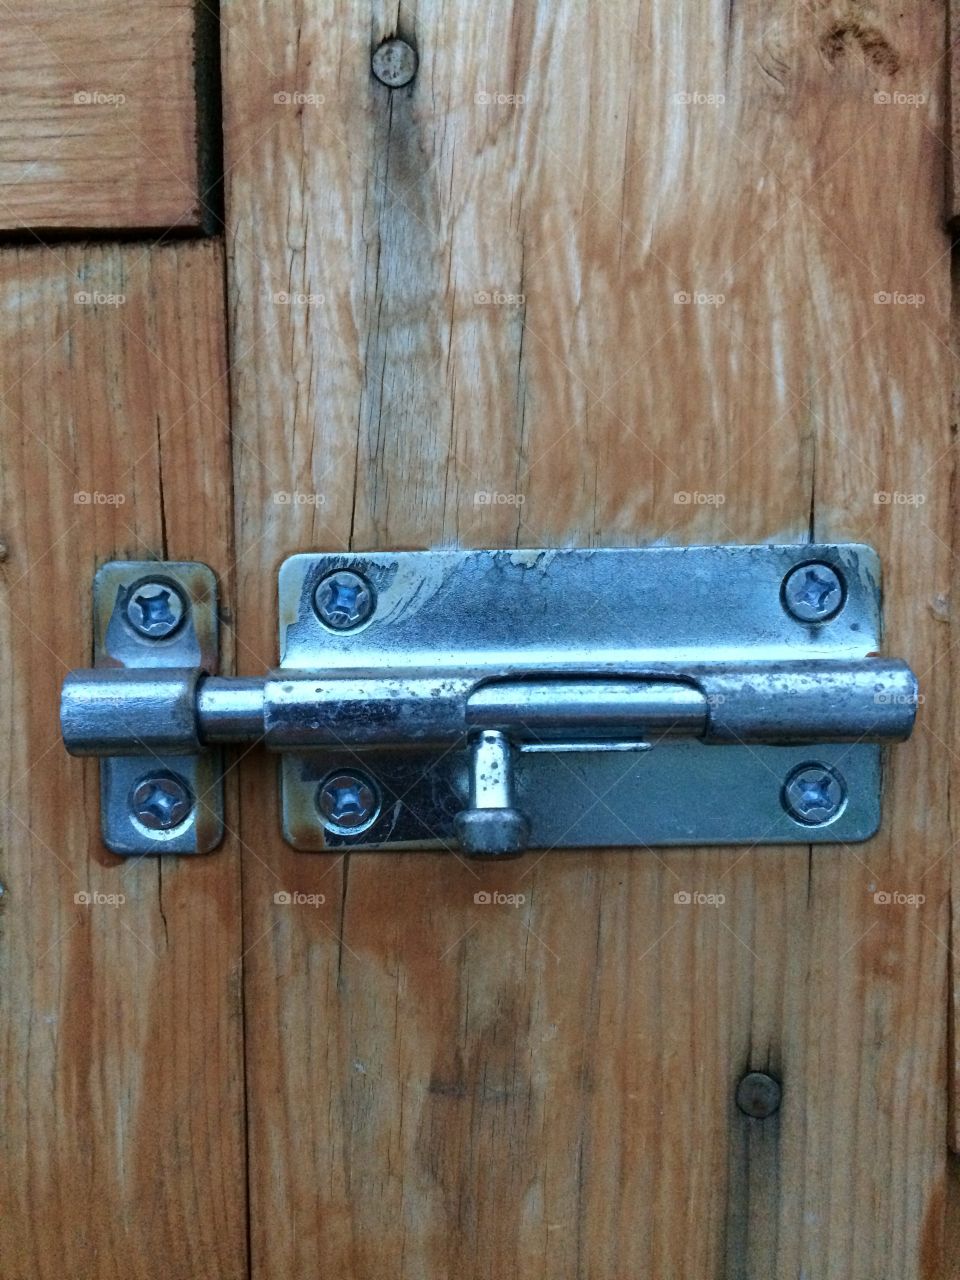 Stainless steel lock on a building 